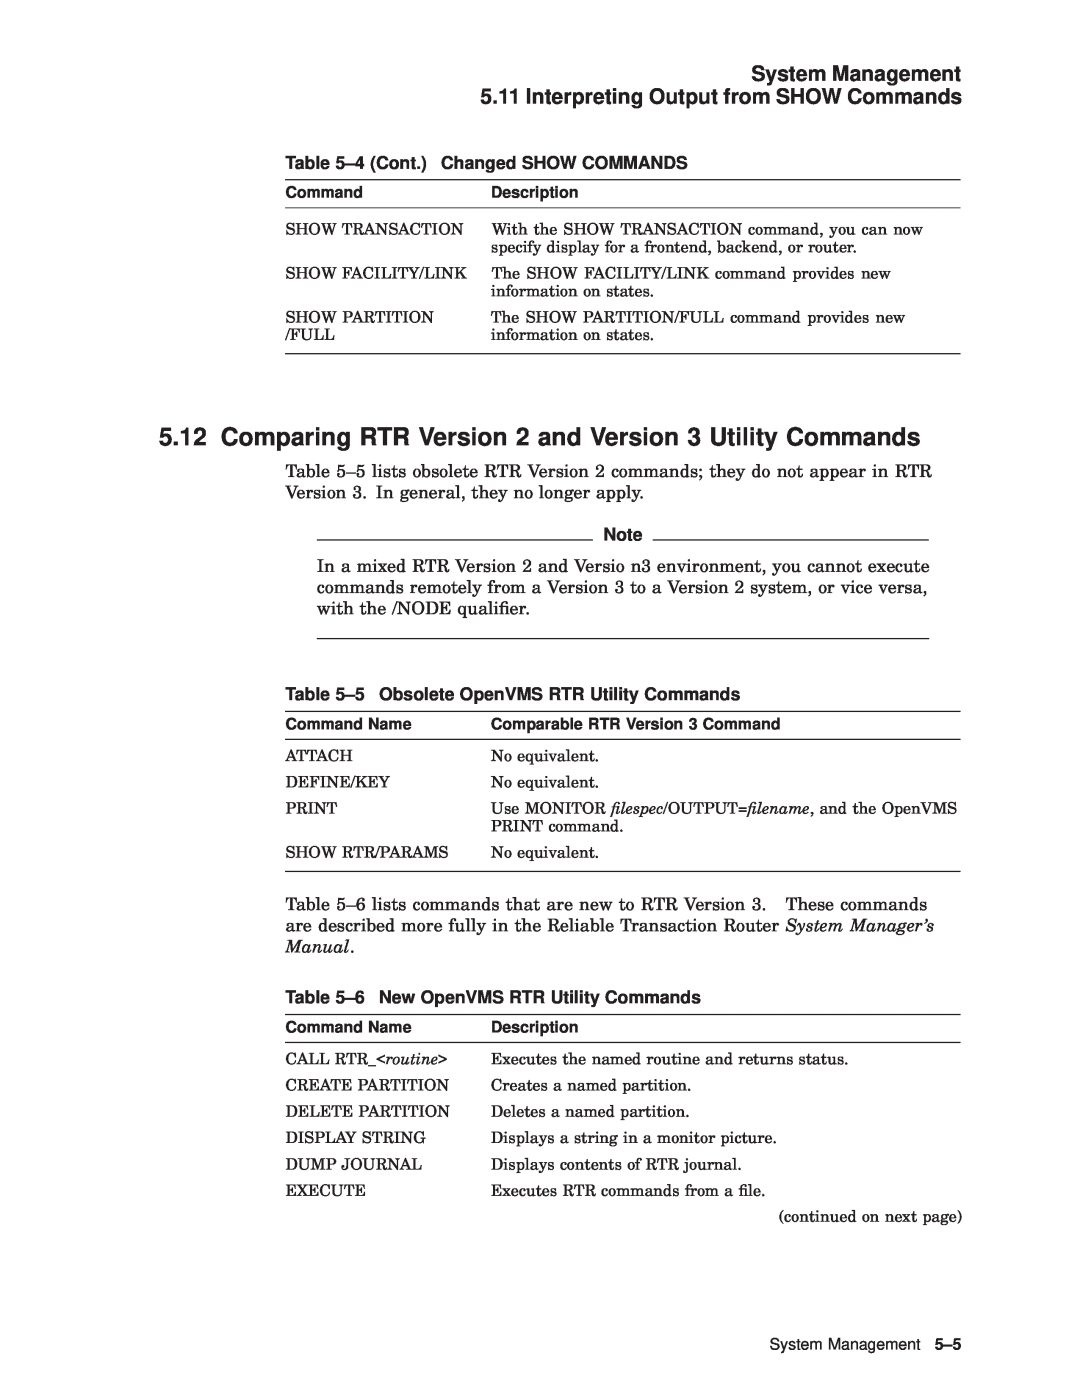 Compaq AAR-88LB-TE manual Comparing RTR Version 2 and Version 3 Utility Commands, 4 Cont. Changed SHOW COMMANDS 